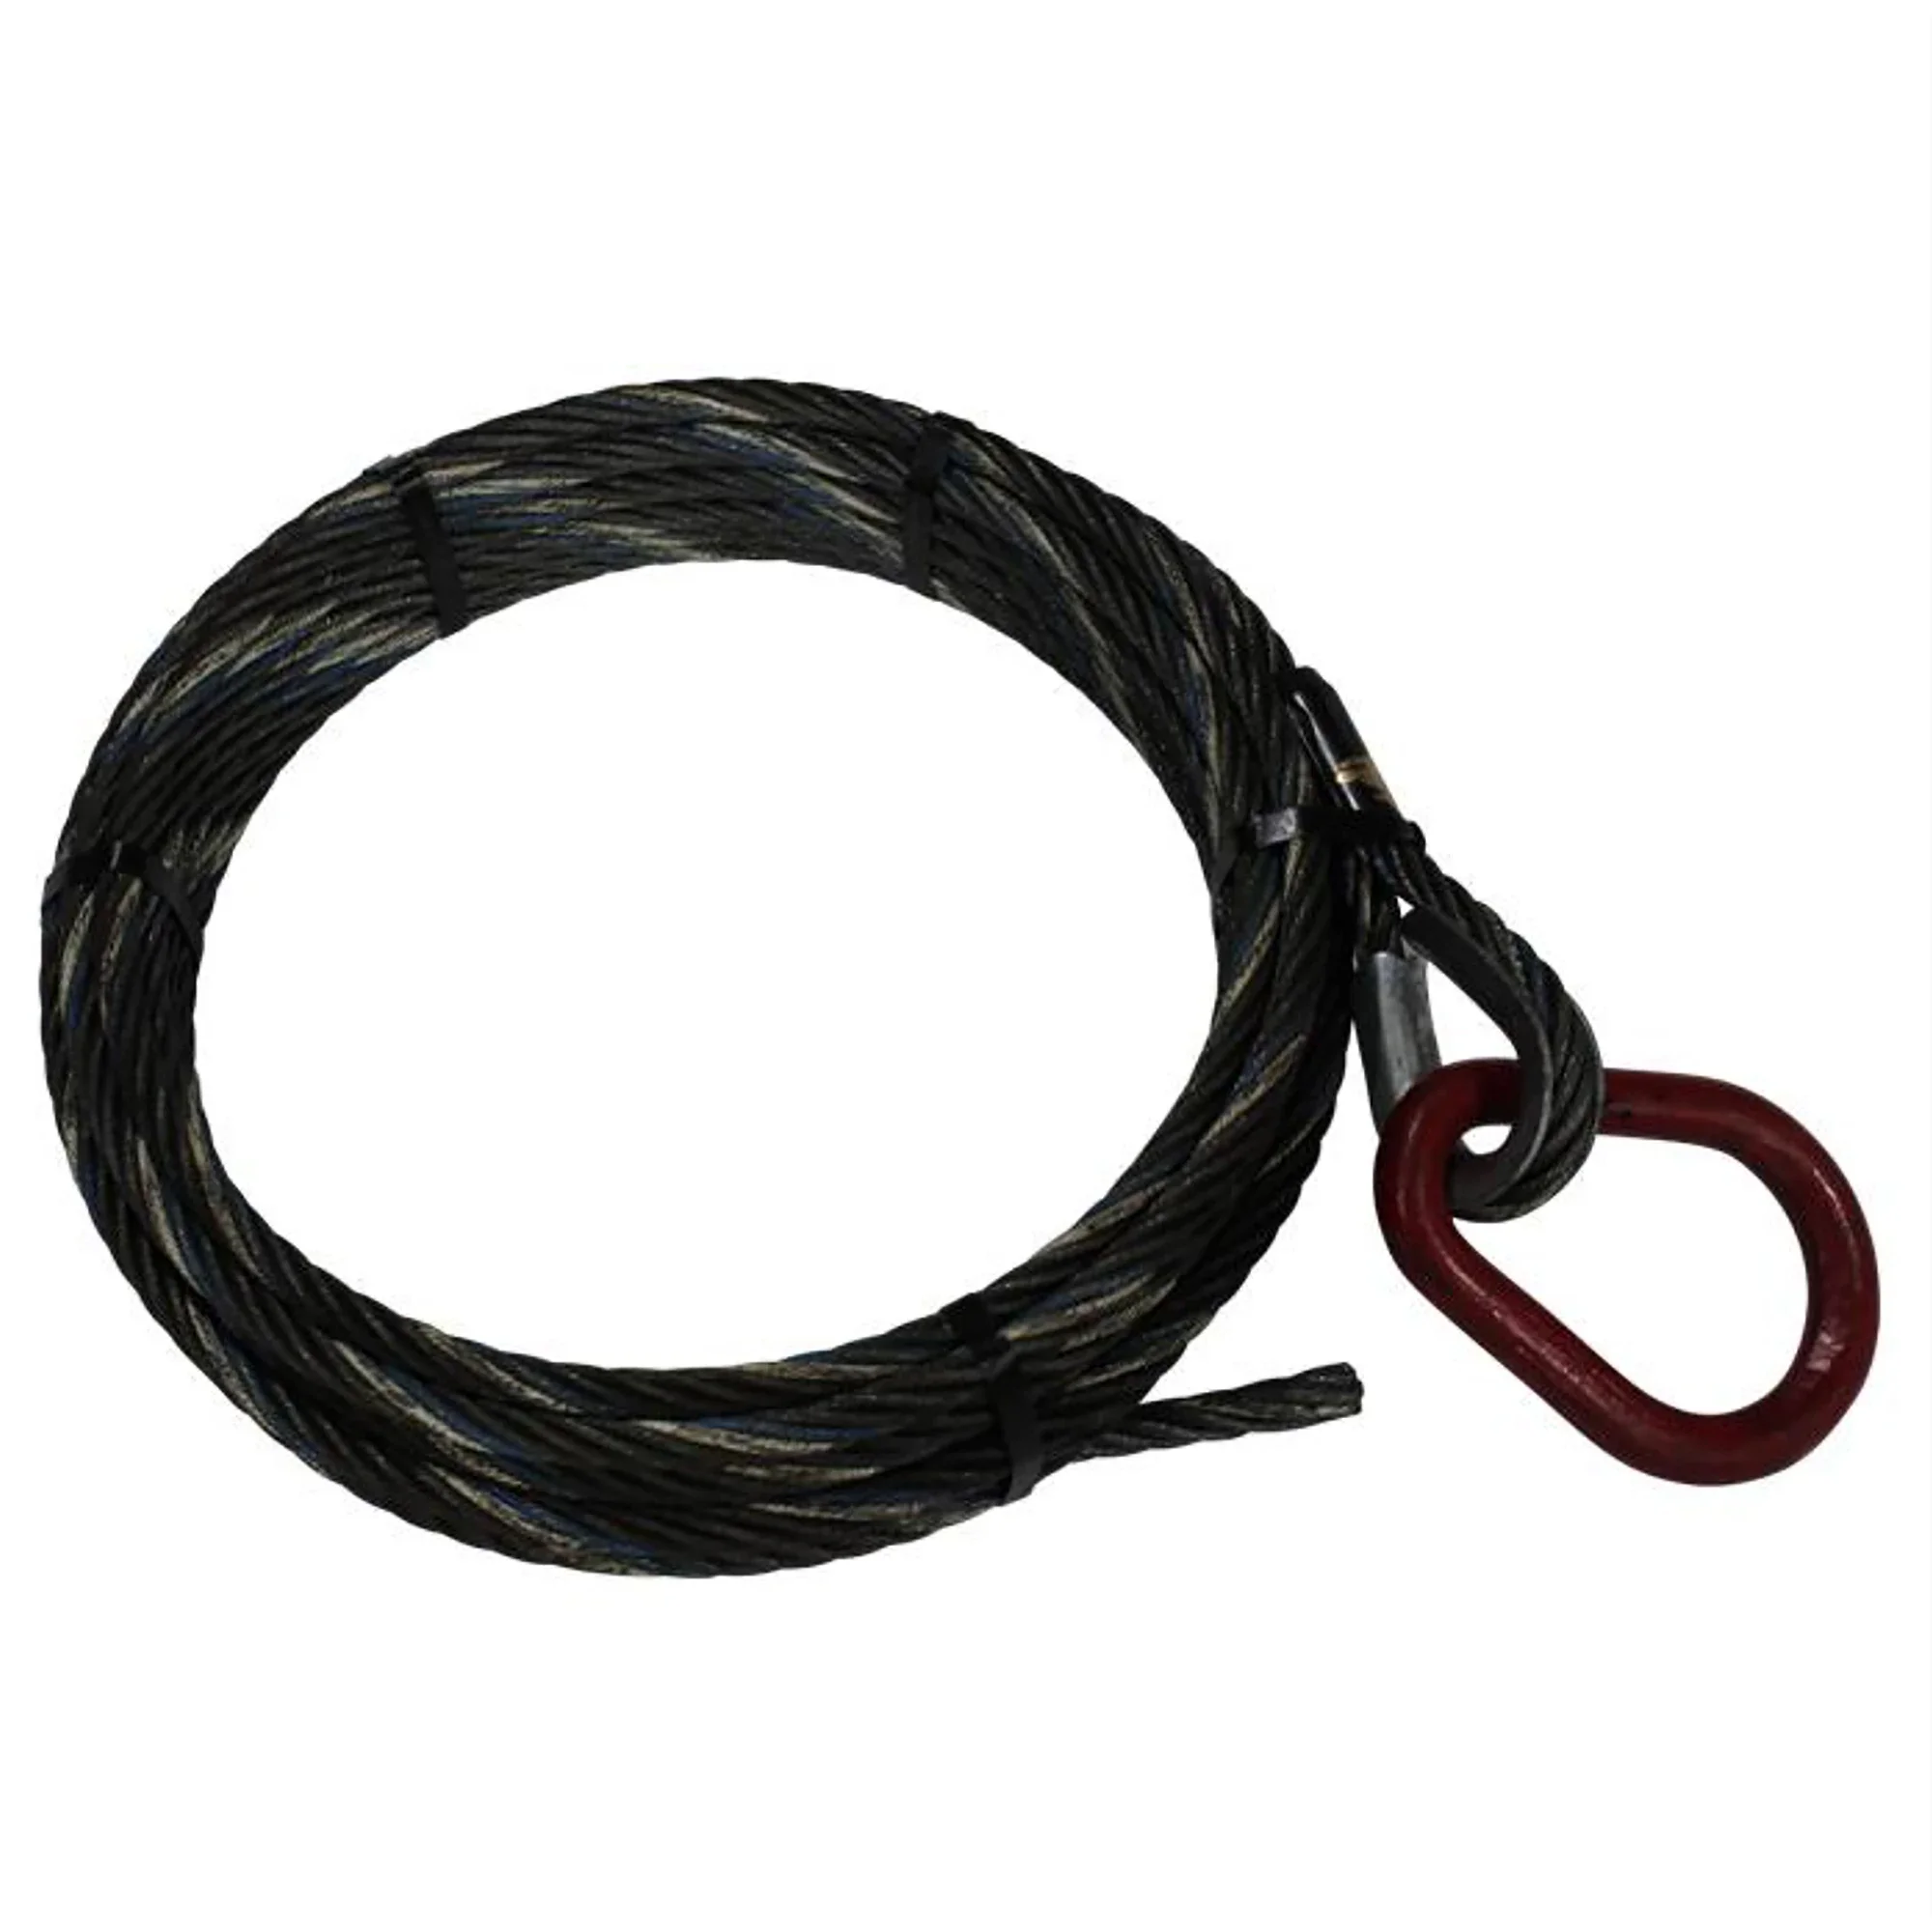 Galbreath™ 7/8" x 91' Cable with Pear Ring